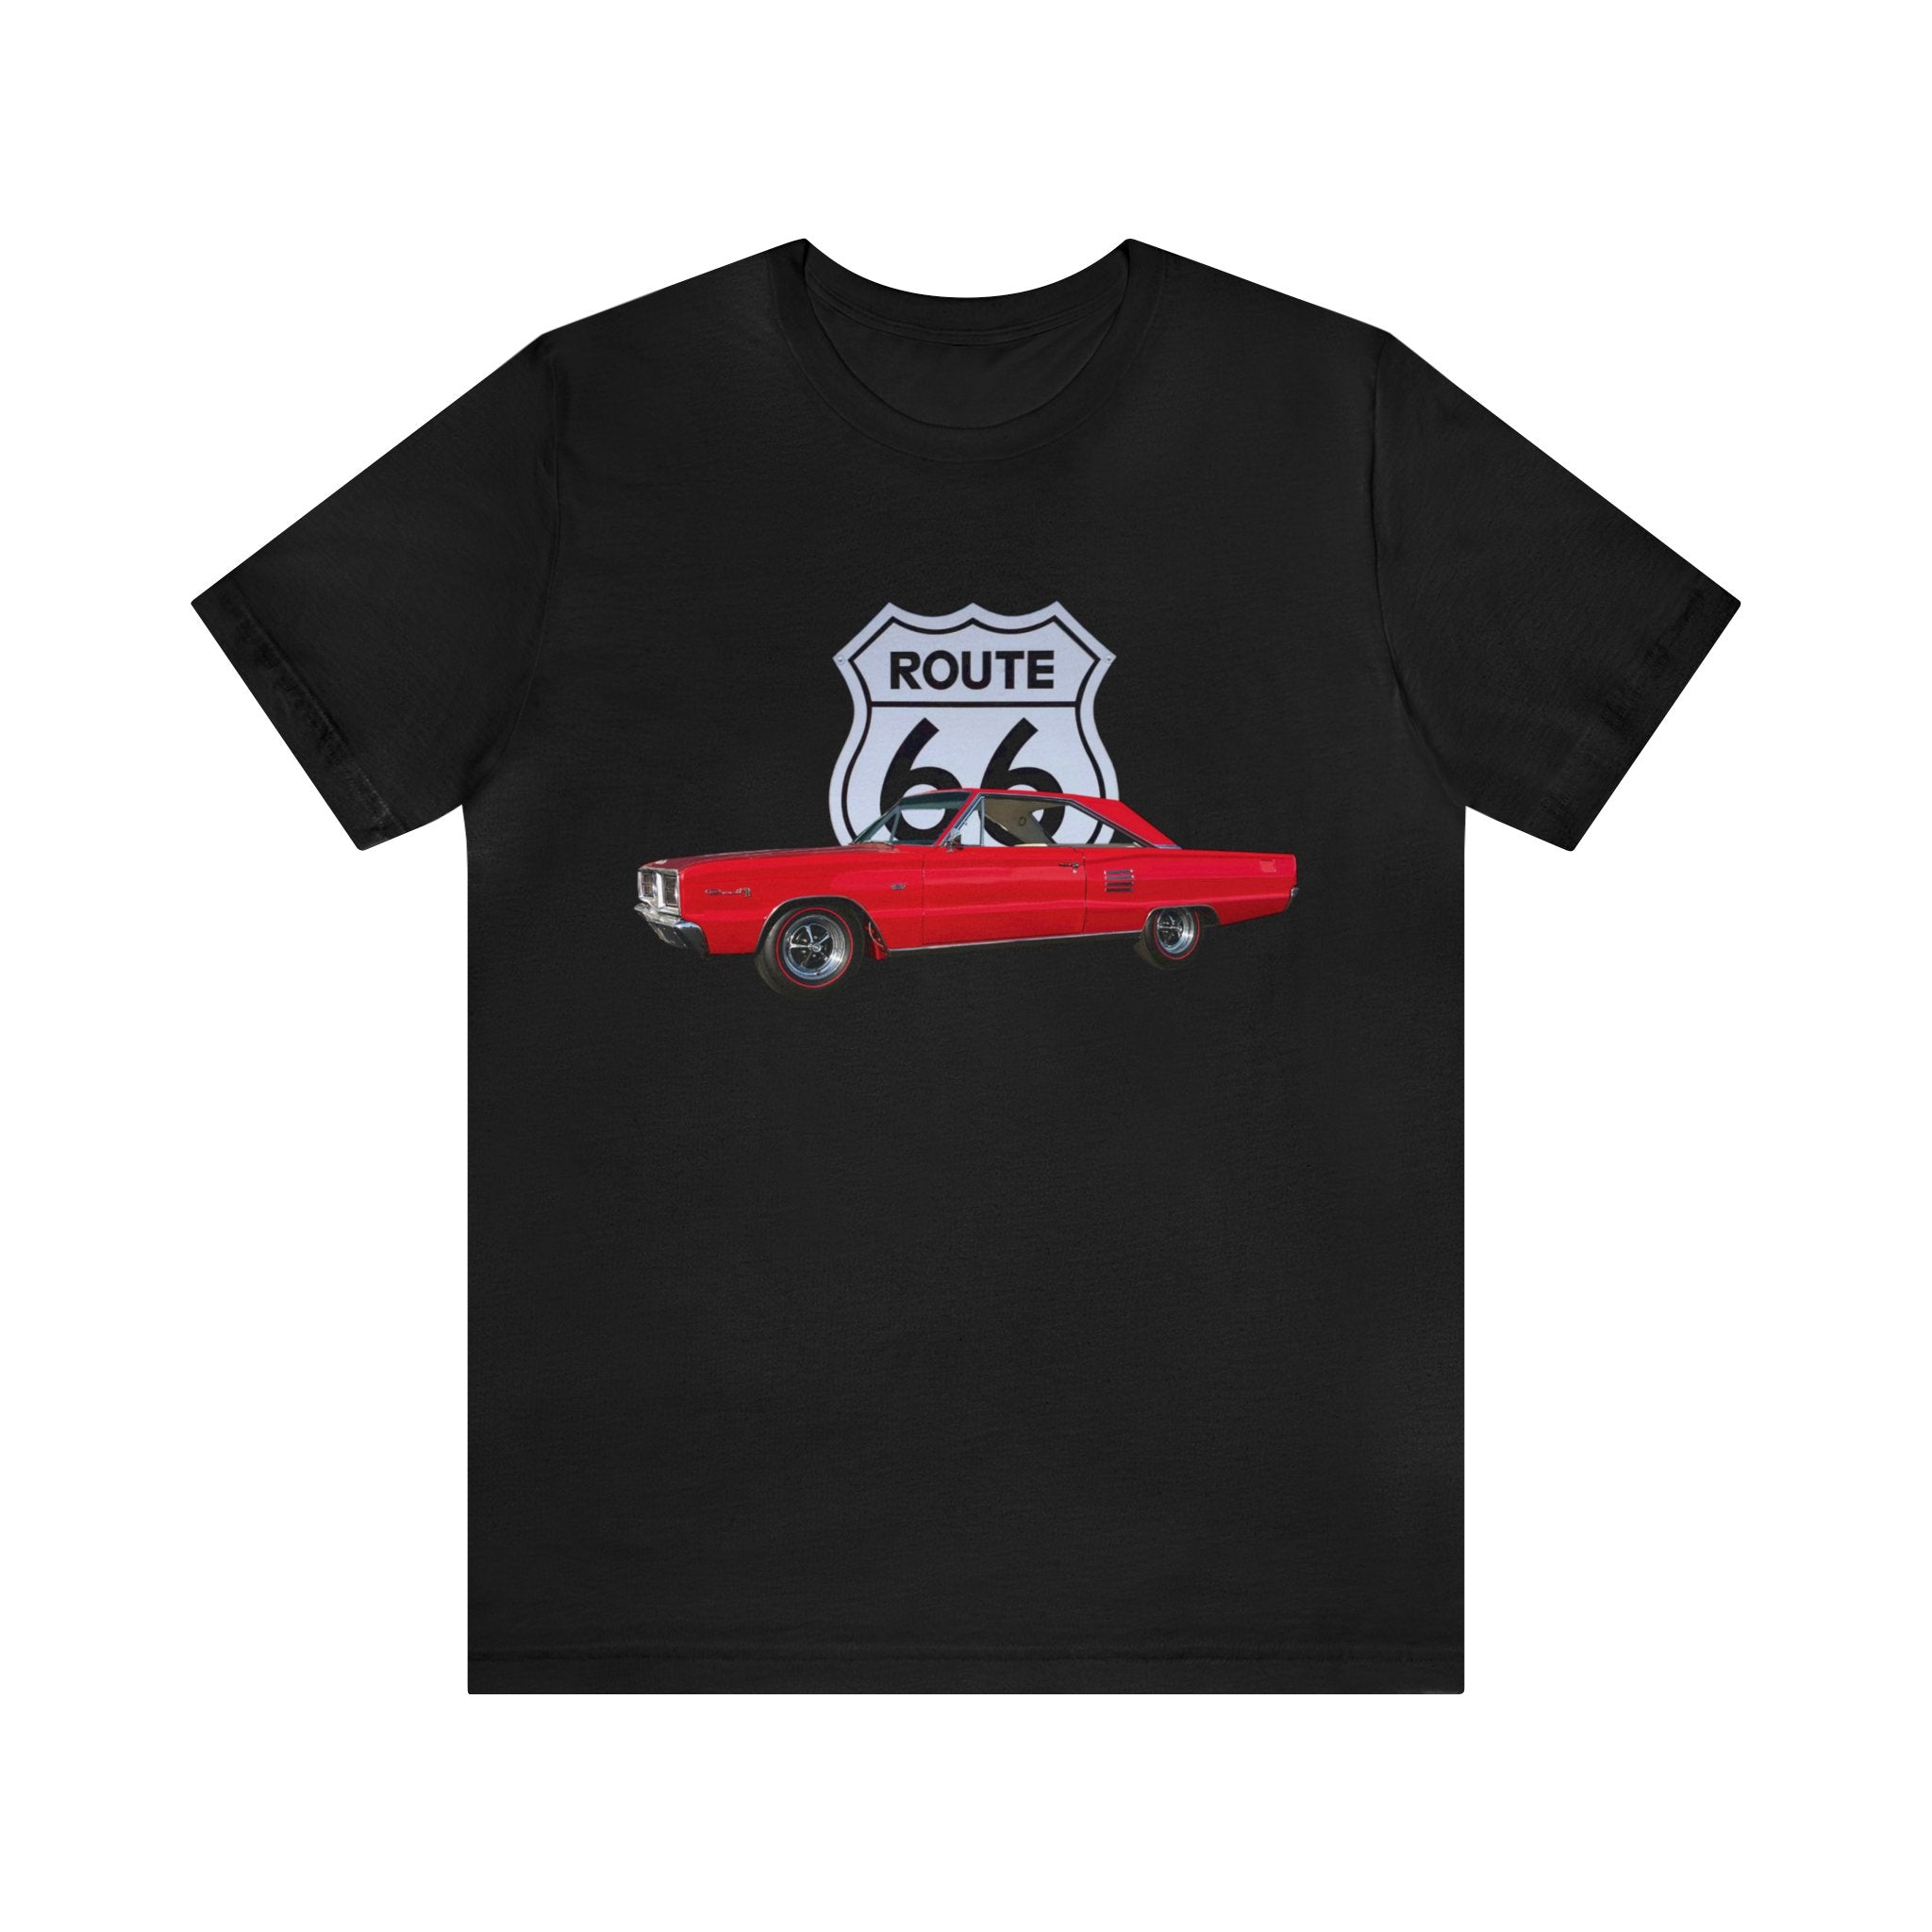 1966 Coronet Short Sleeve Tee in our route 66 series